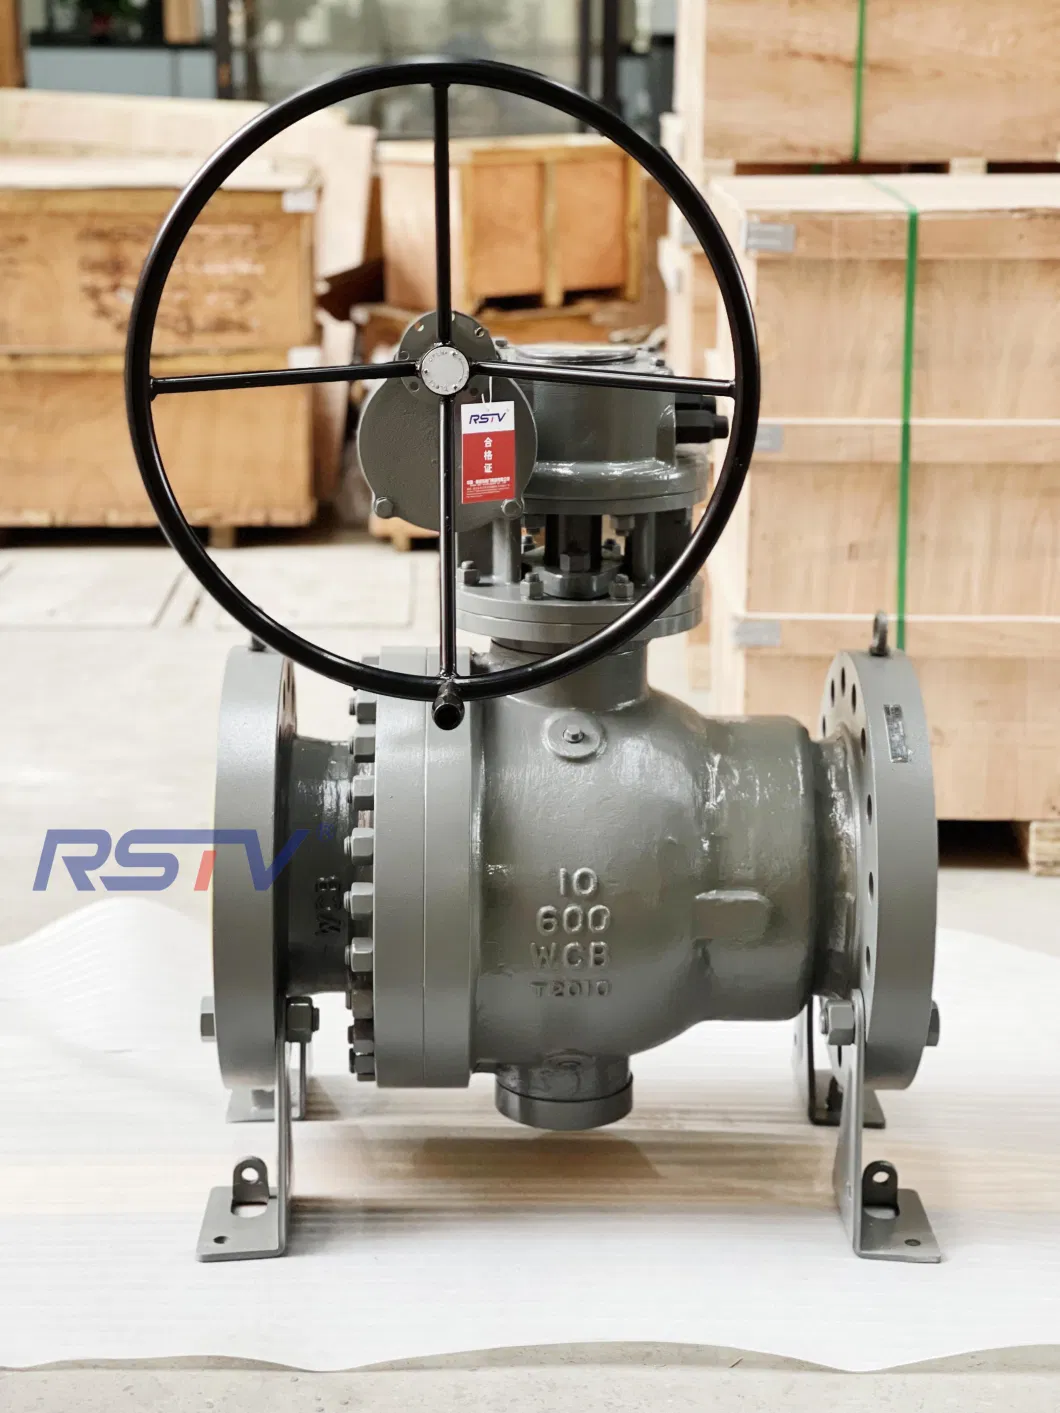 Stainless Steel/ Wcb Flange End Worm Gear/ Electric/Pneumatic Industrial Trunnion Ball Valve